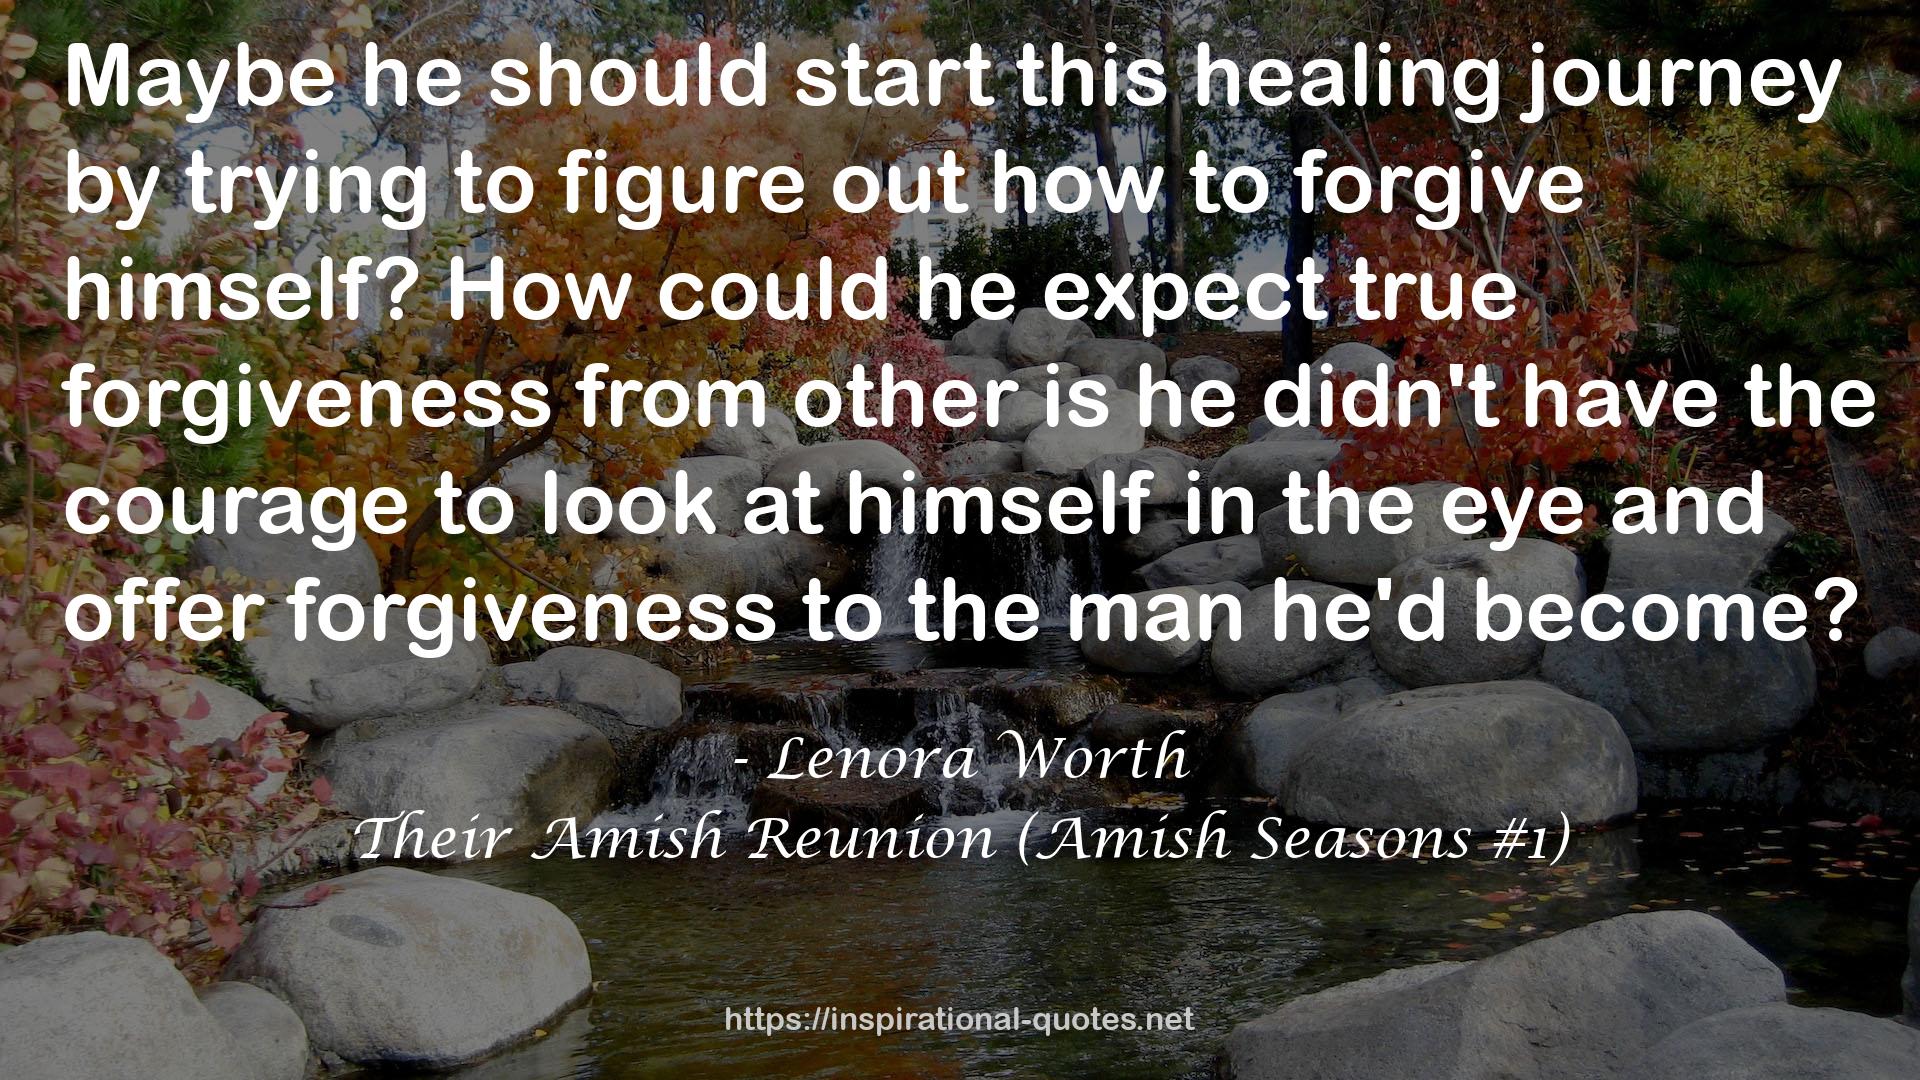 Their Amish Reunion (Amish Seasons #1) QUOTES